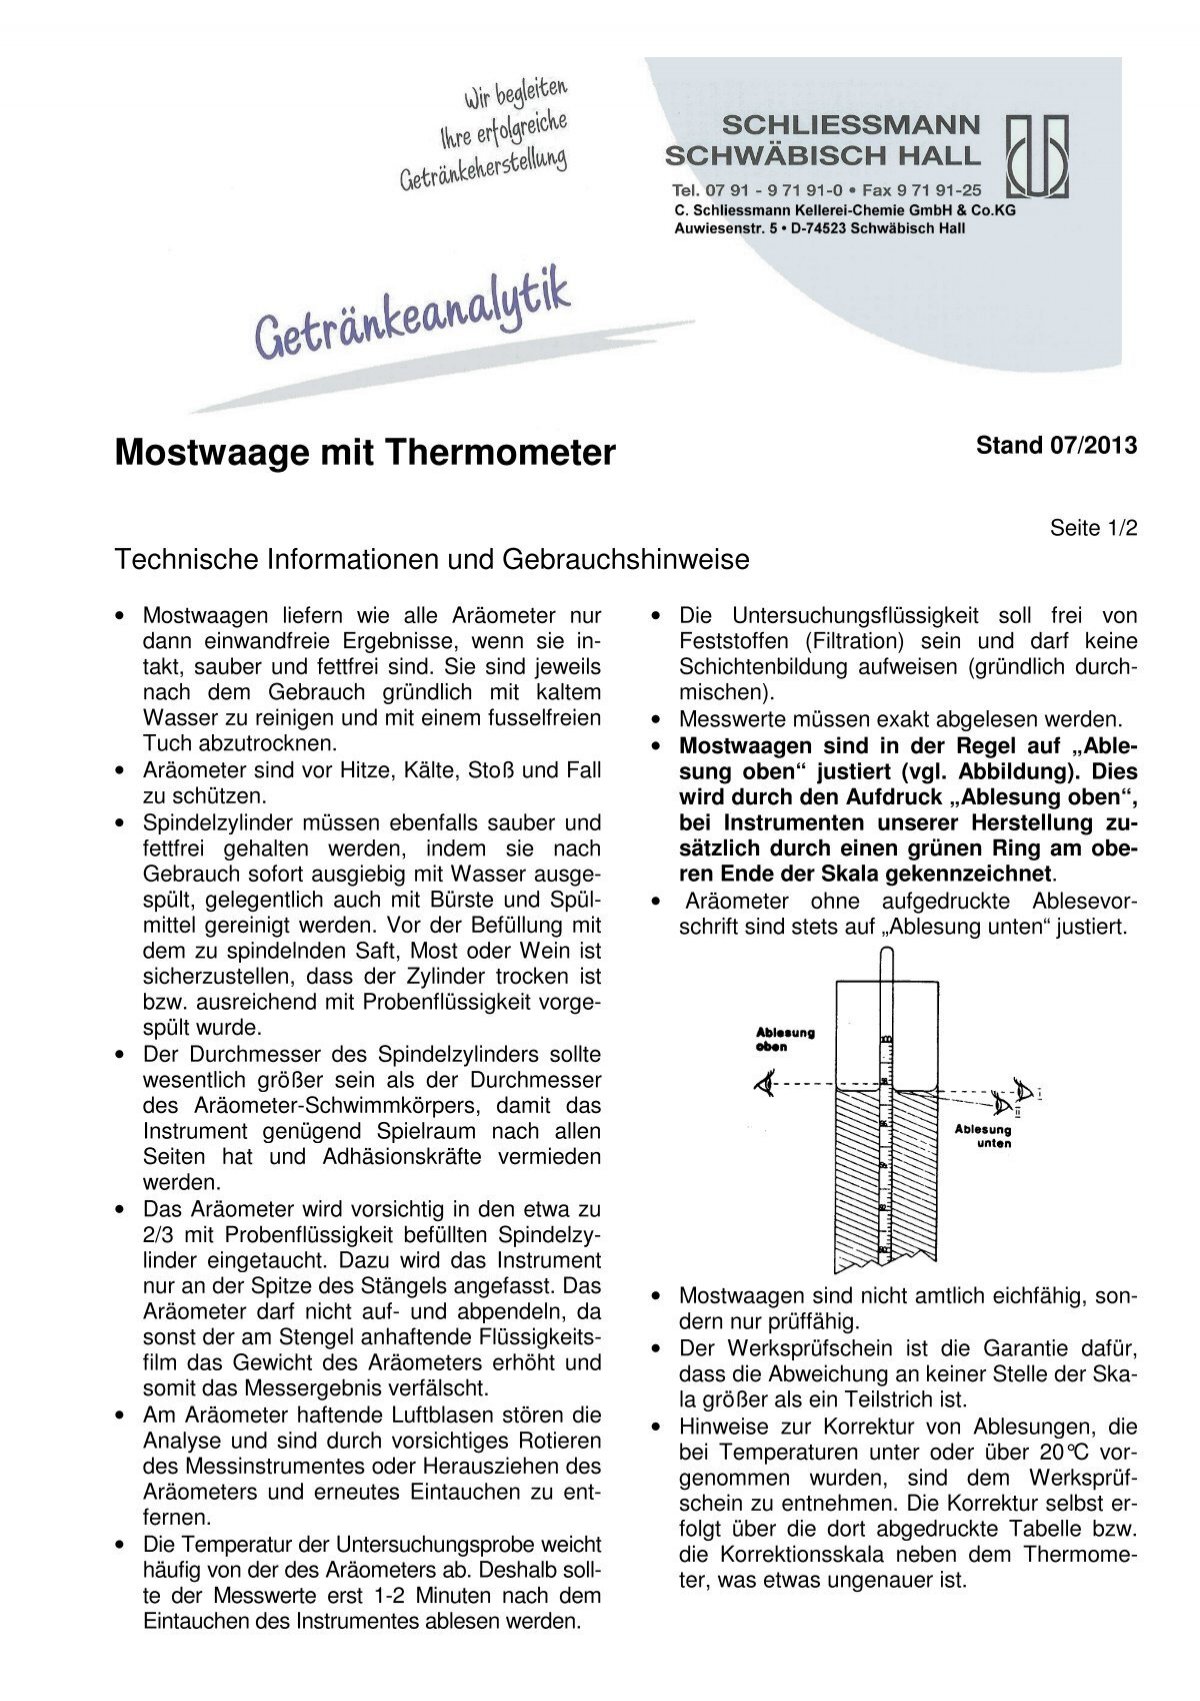 Mostwaage mit Thermometer